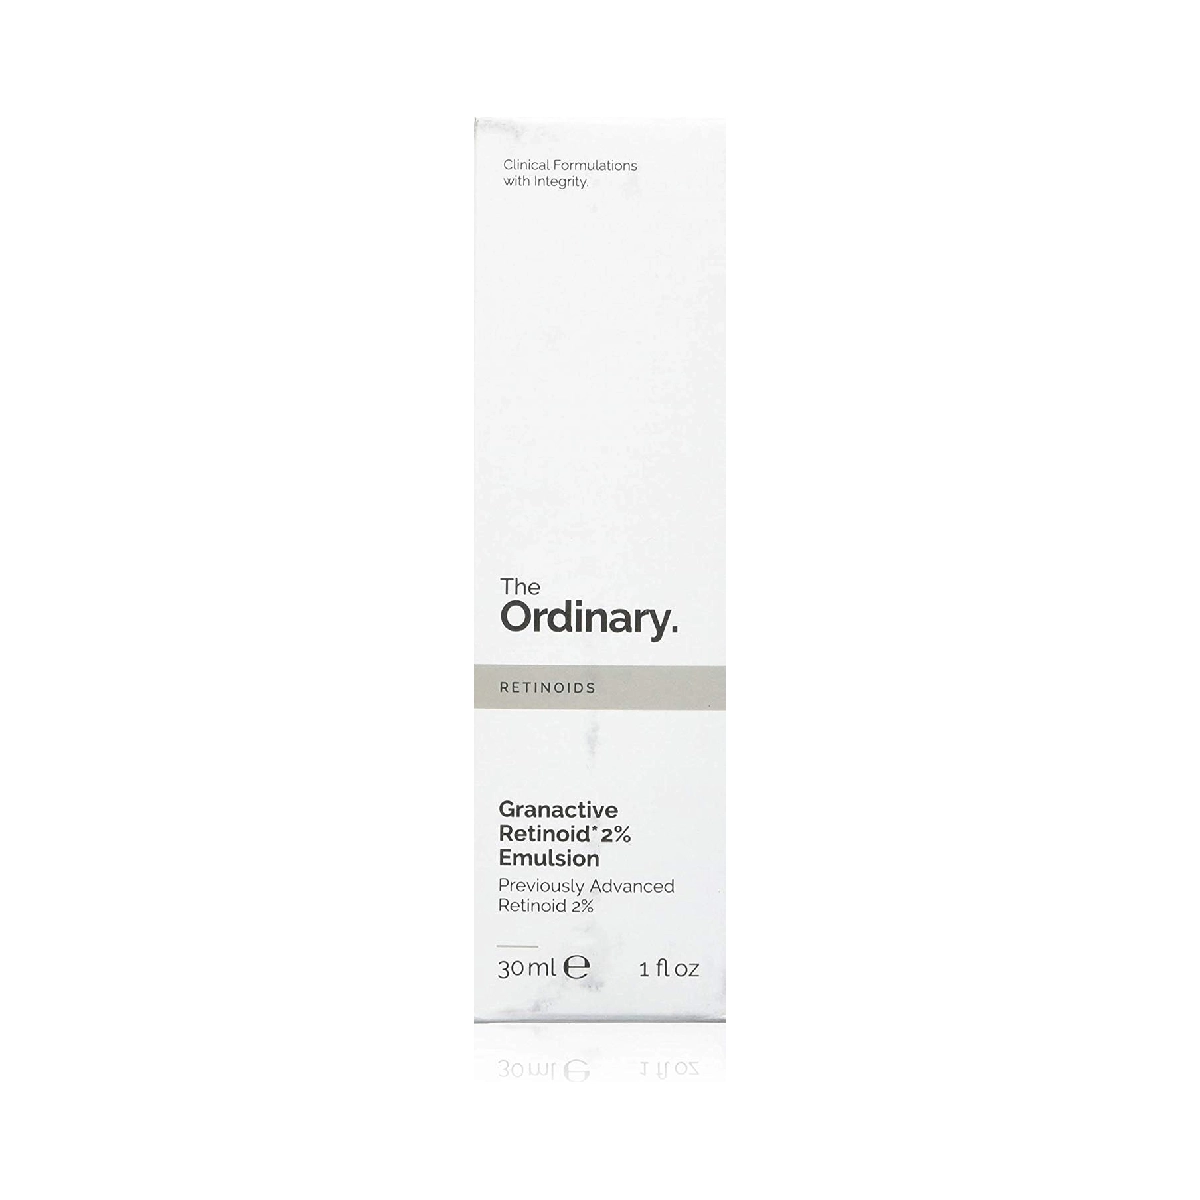 The Ordinary Granactive Retinoid 2% Emulsion - product against a white background.